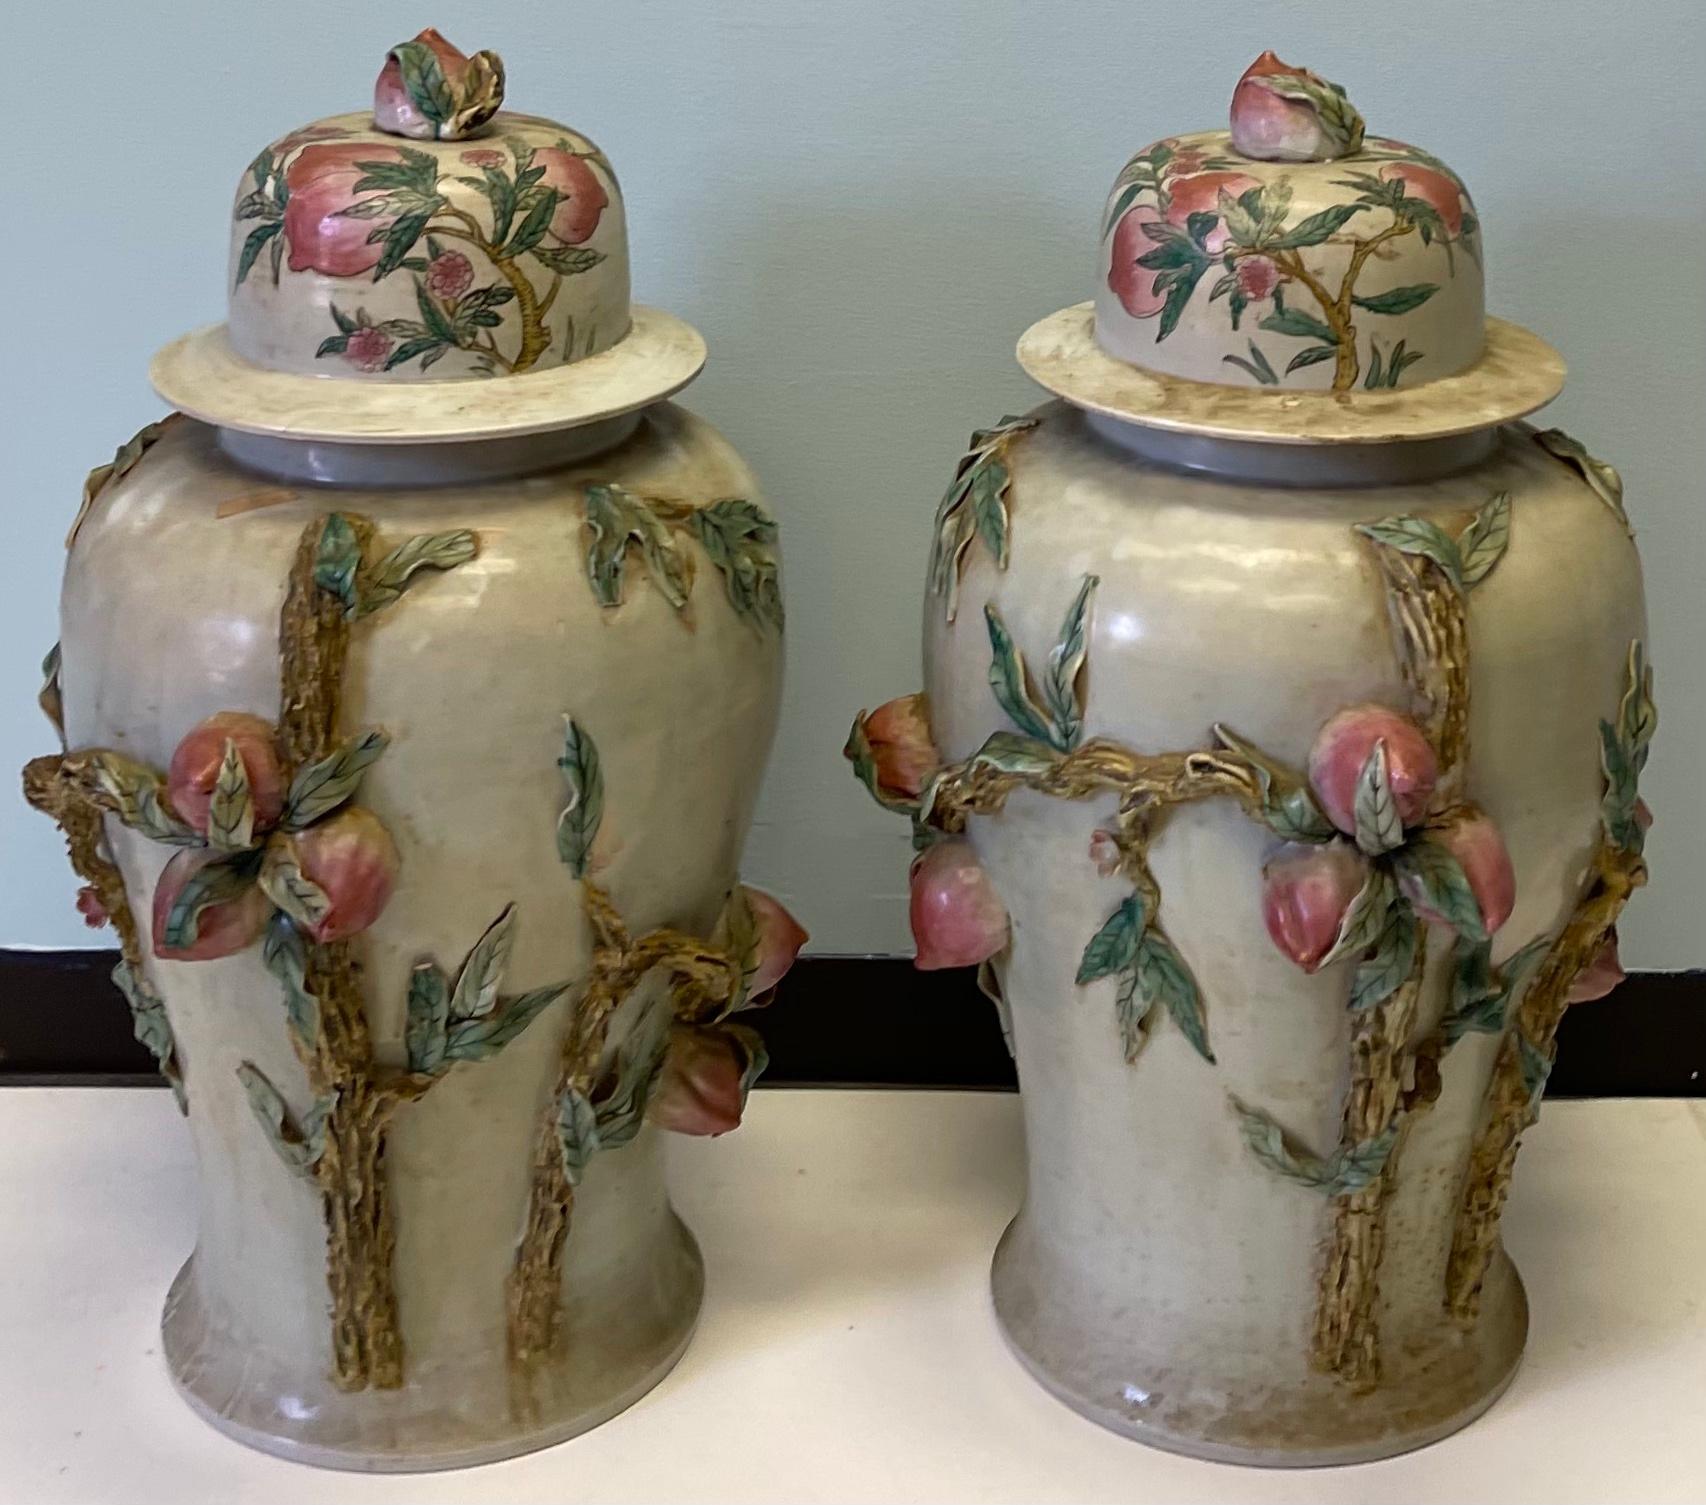 20th Century Monumental Chinese Ginger Jars with Fruit and Faux Bois Foliate, Pair